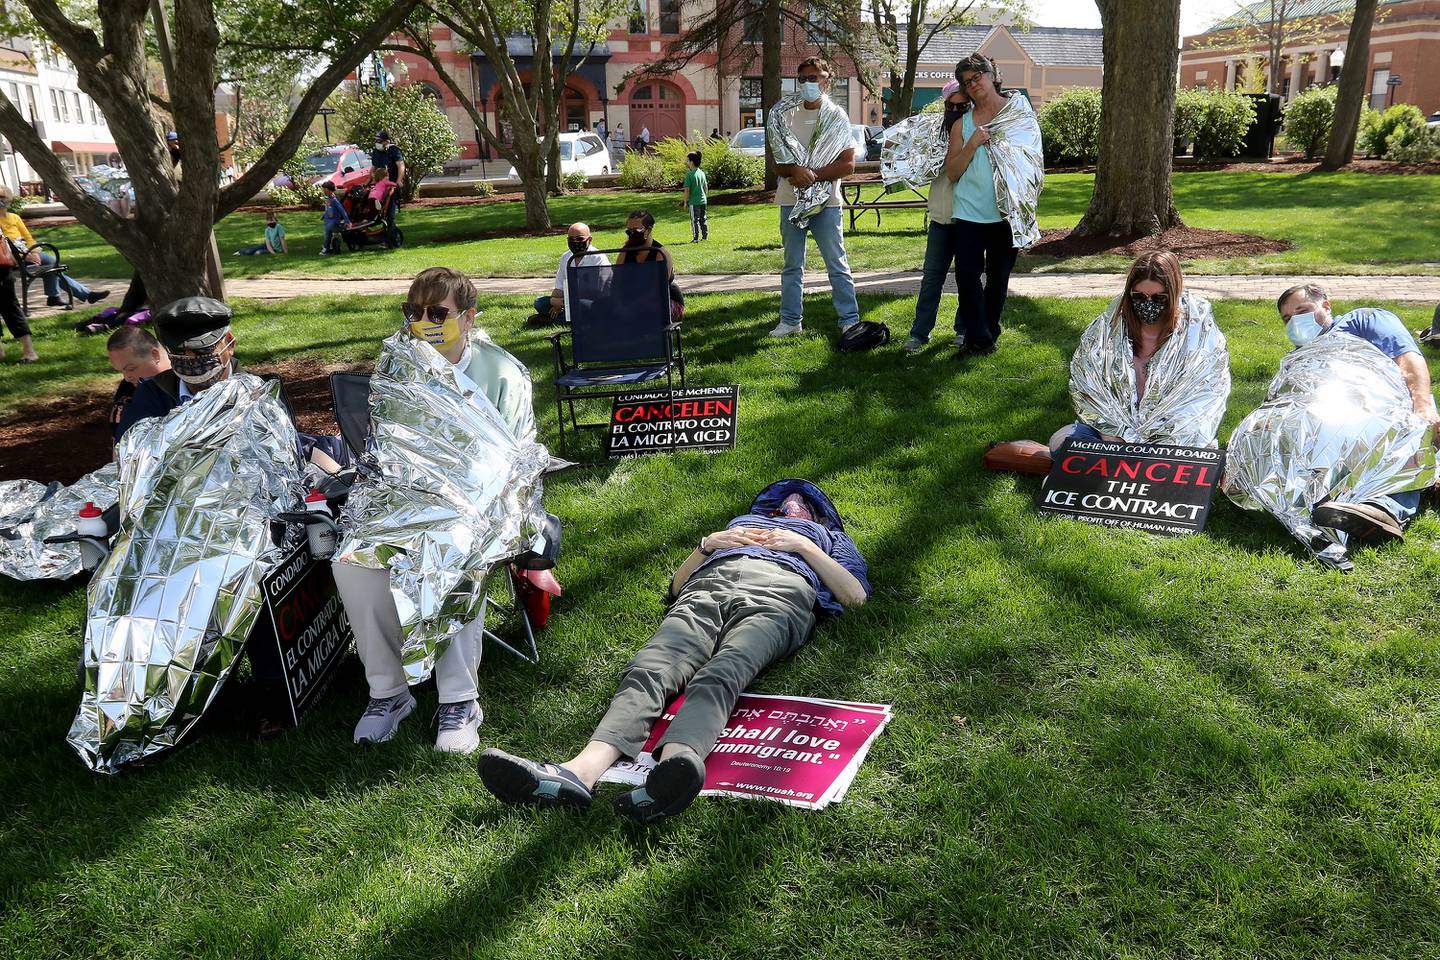 Attendees listen to speakers as some wrap themselves in a thin mylar sheet as symbolism and in solidarity with ICE detainees who are issued the same thin blankets while in custody. Approximately 80 people were in attendance at the rally to end McHenry County's contract with U.S. Immigration and Customs Enforcement on Saturday, May 1, 2021 in Woodstock.